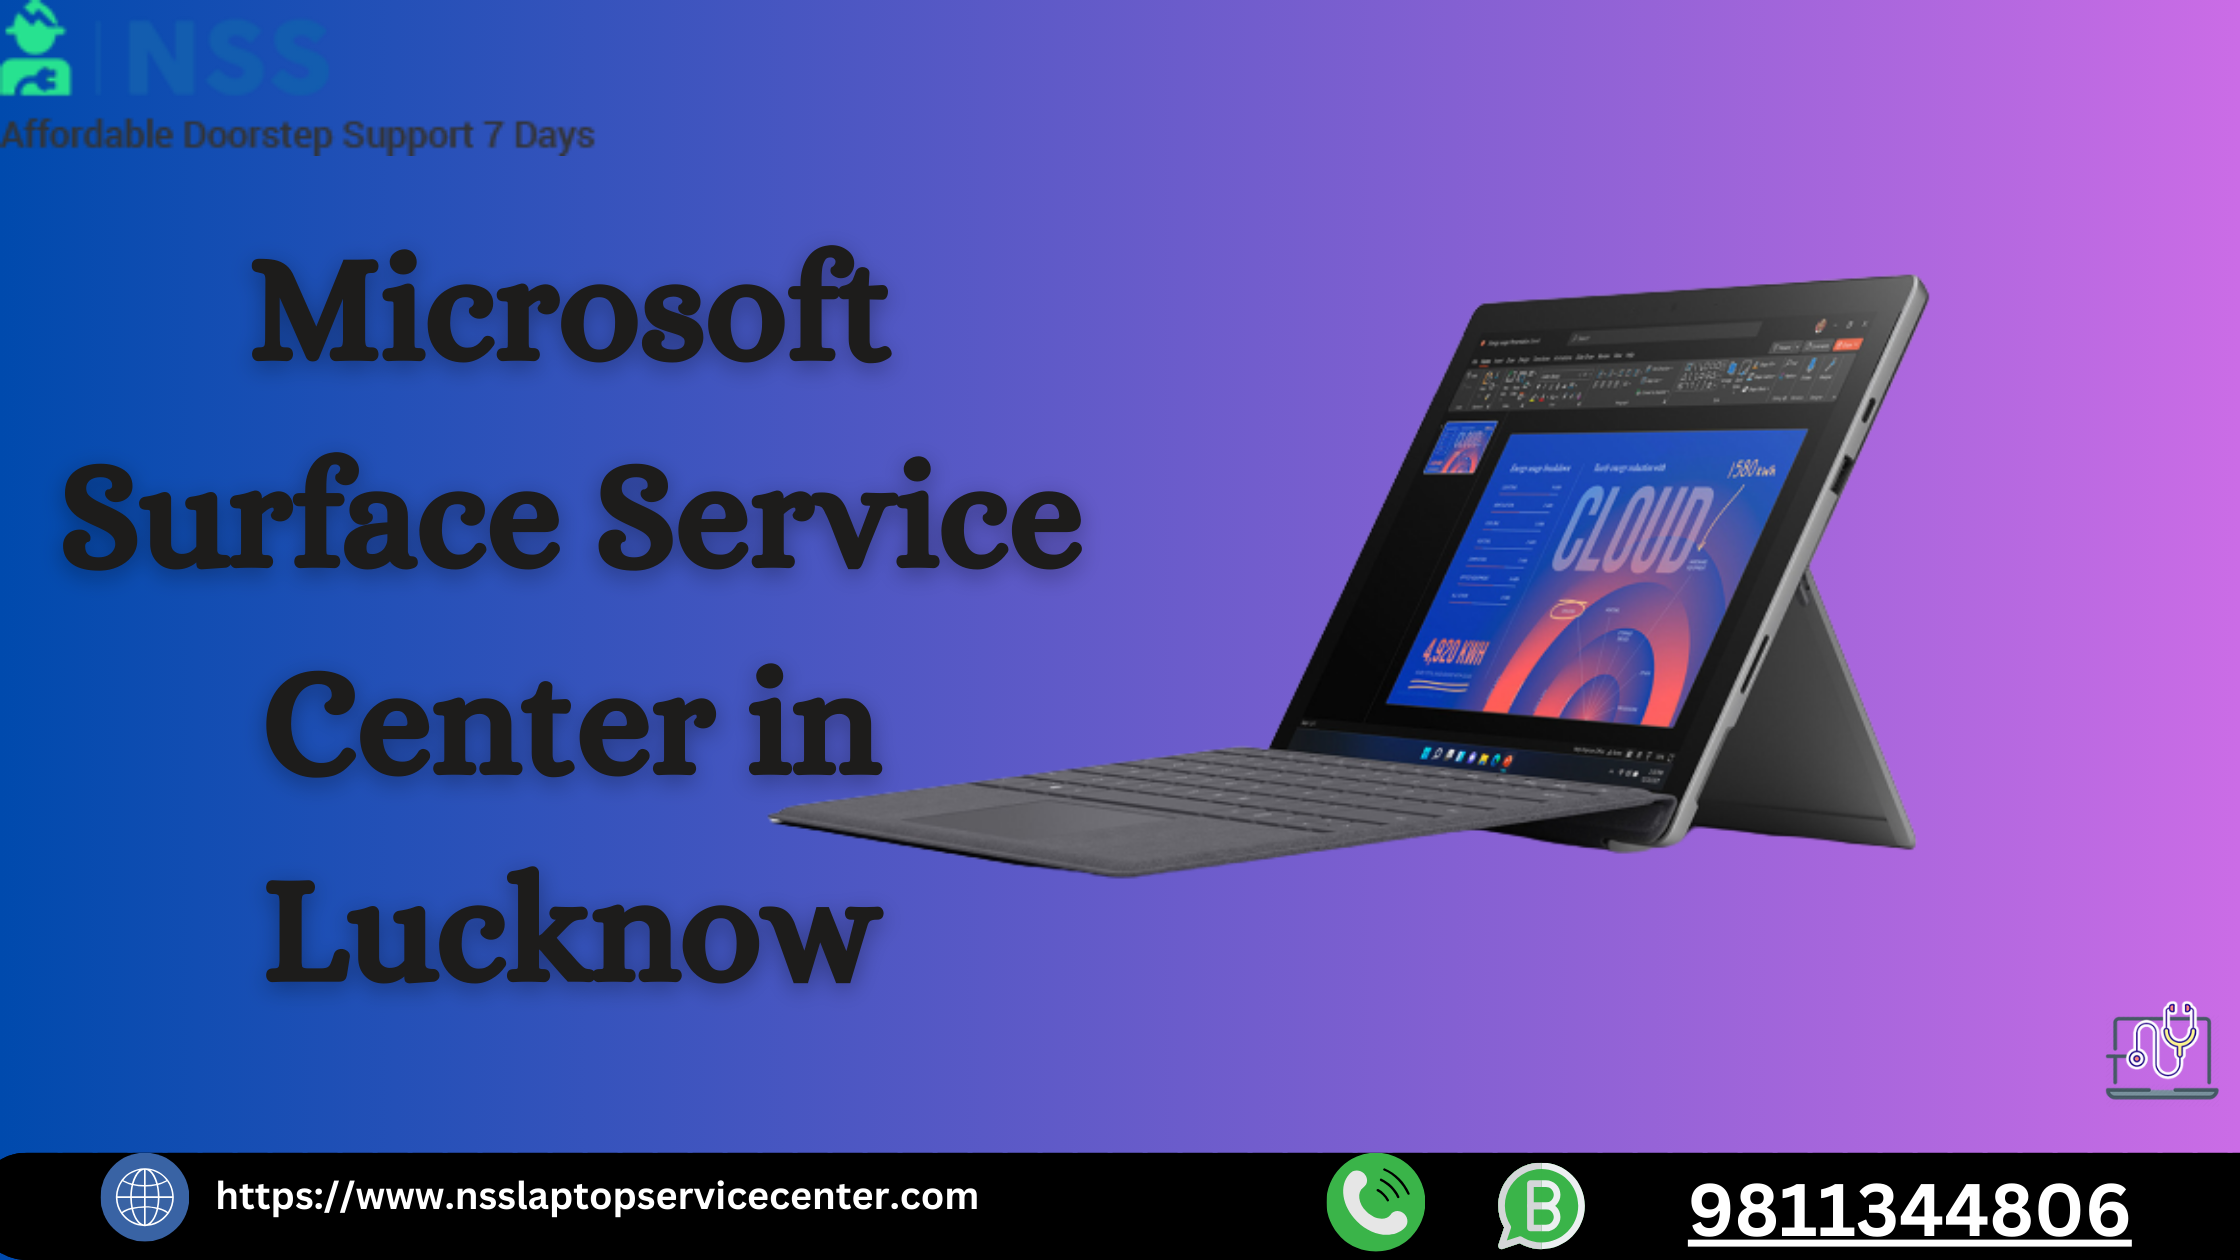 Microsoft Surface Service Center in Lucknow